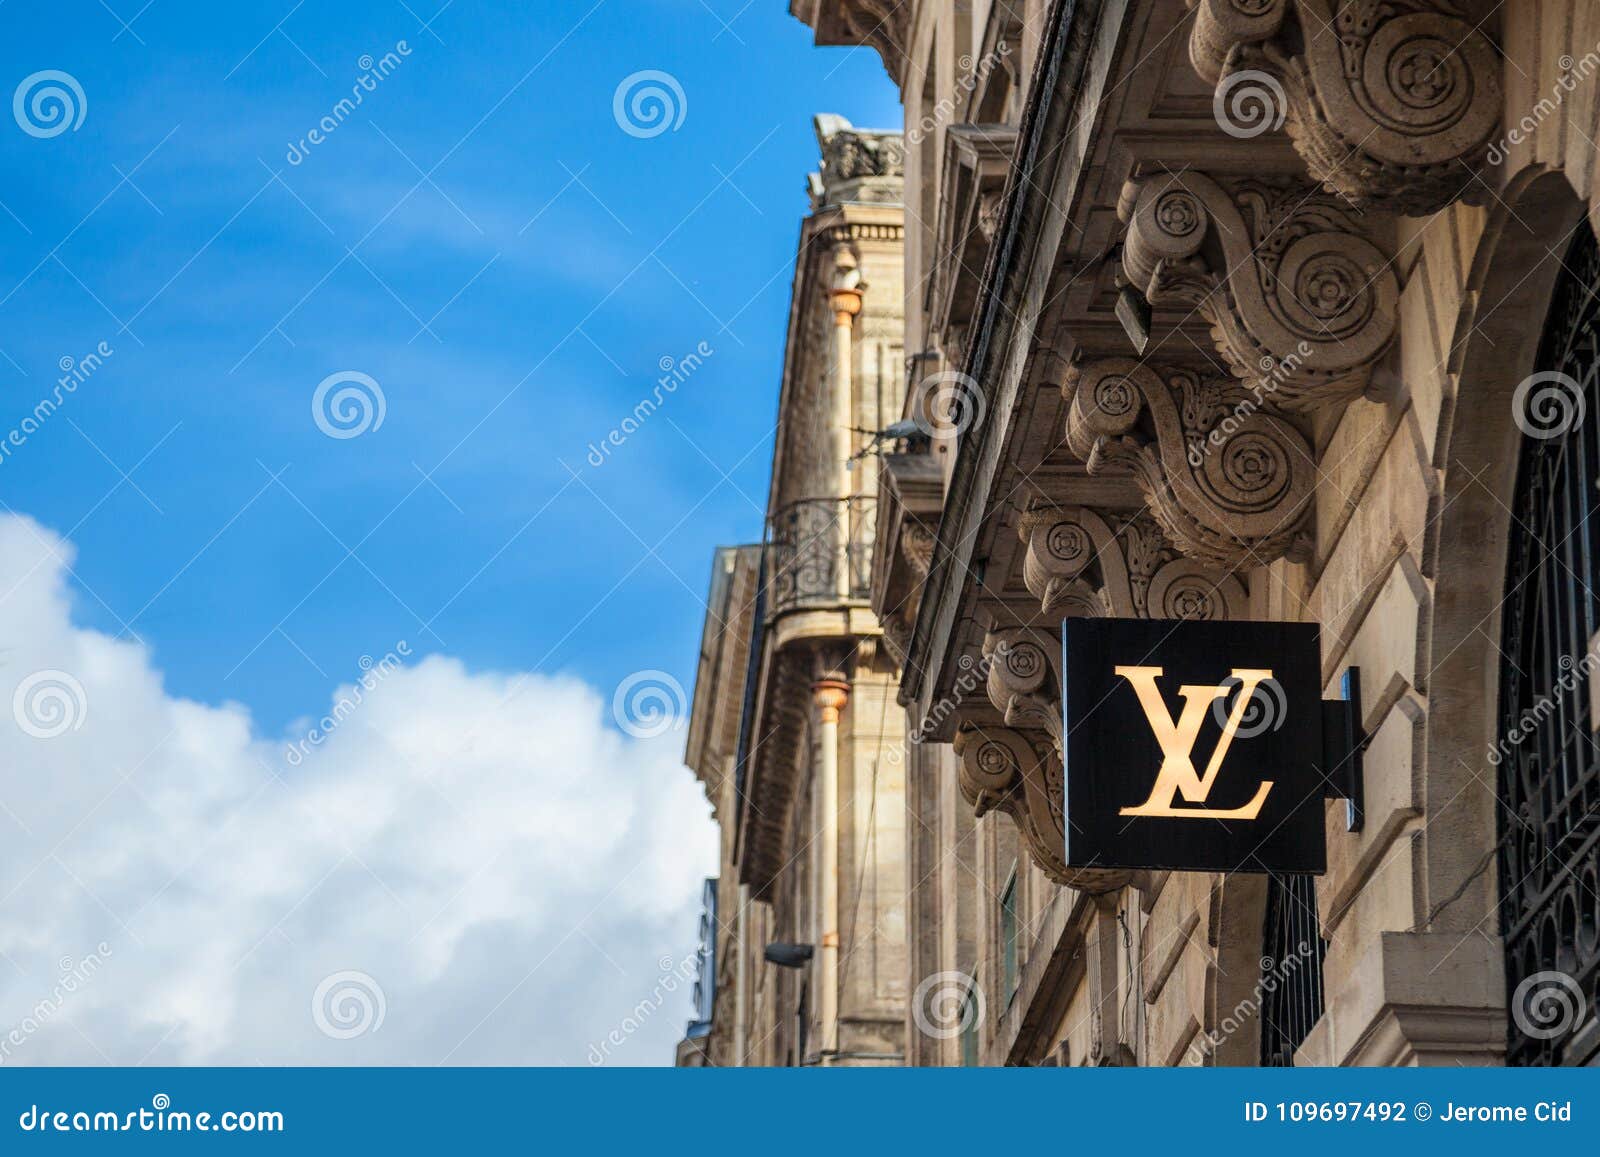 File photo dated September 5, 2012 of Louis Vuitton (LVMH) logo in  Deauville, France. Vendome sold part of the brand rights of its name to Louis  Vuitton. In 2018, shortly after the